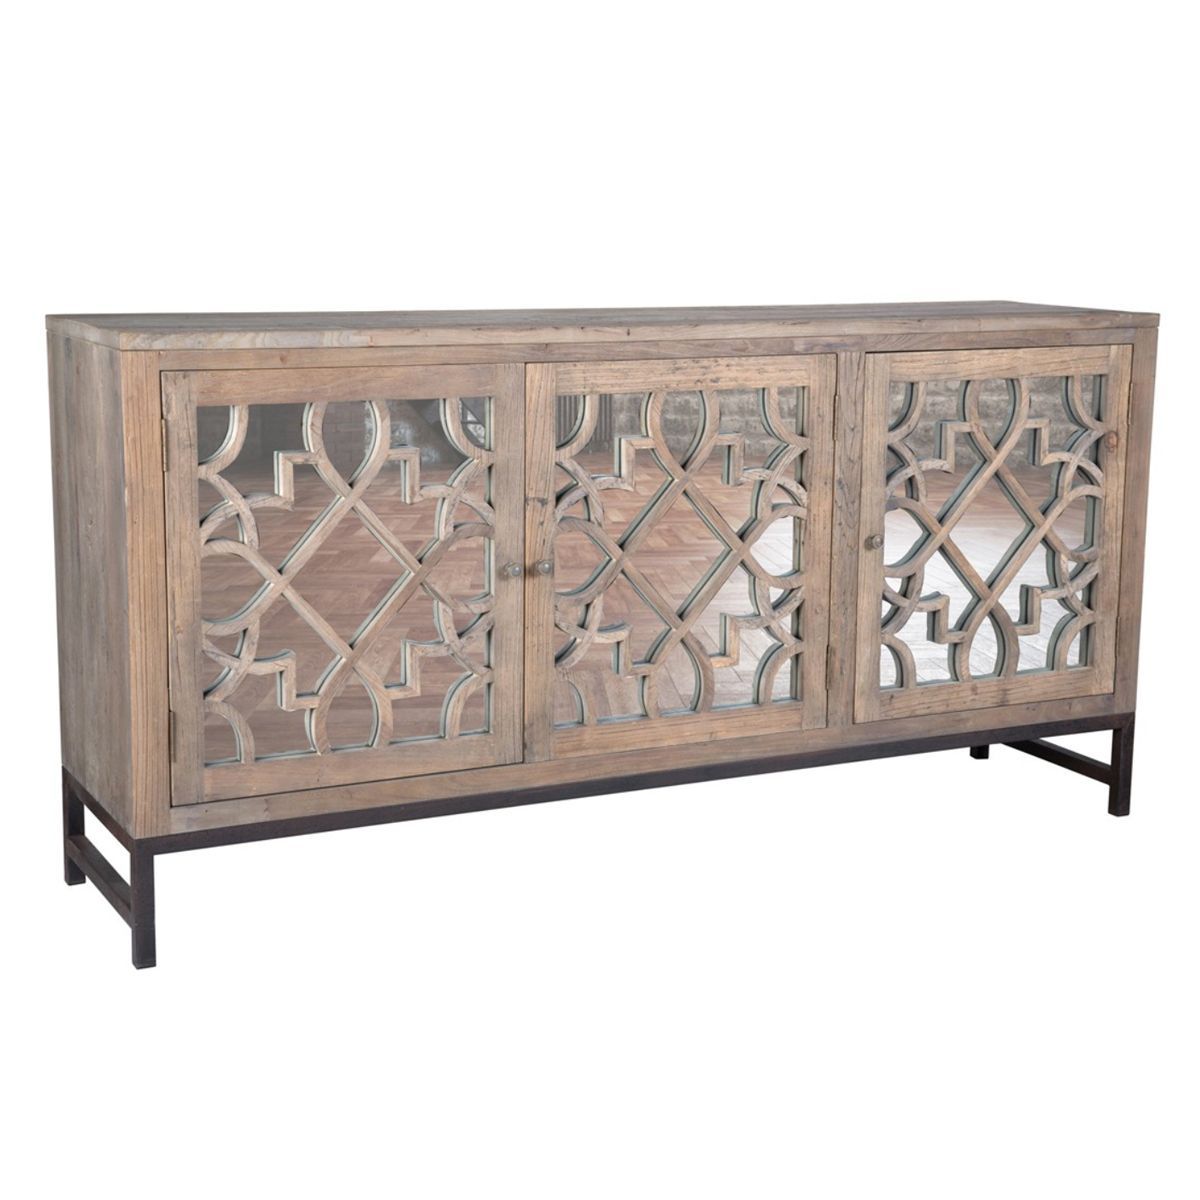 Sanford 3 Door Sideboard | Entry Foyer | Mirror Buffet For Latest Haroun Mocha Sideboards (View 12 of 20)